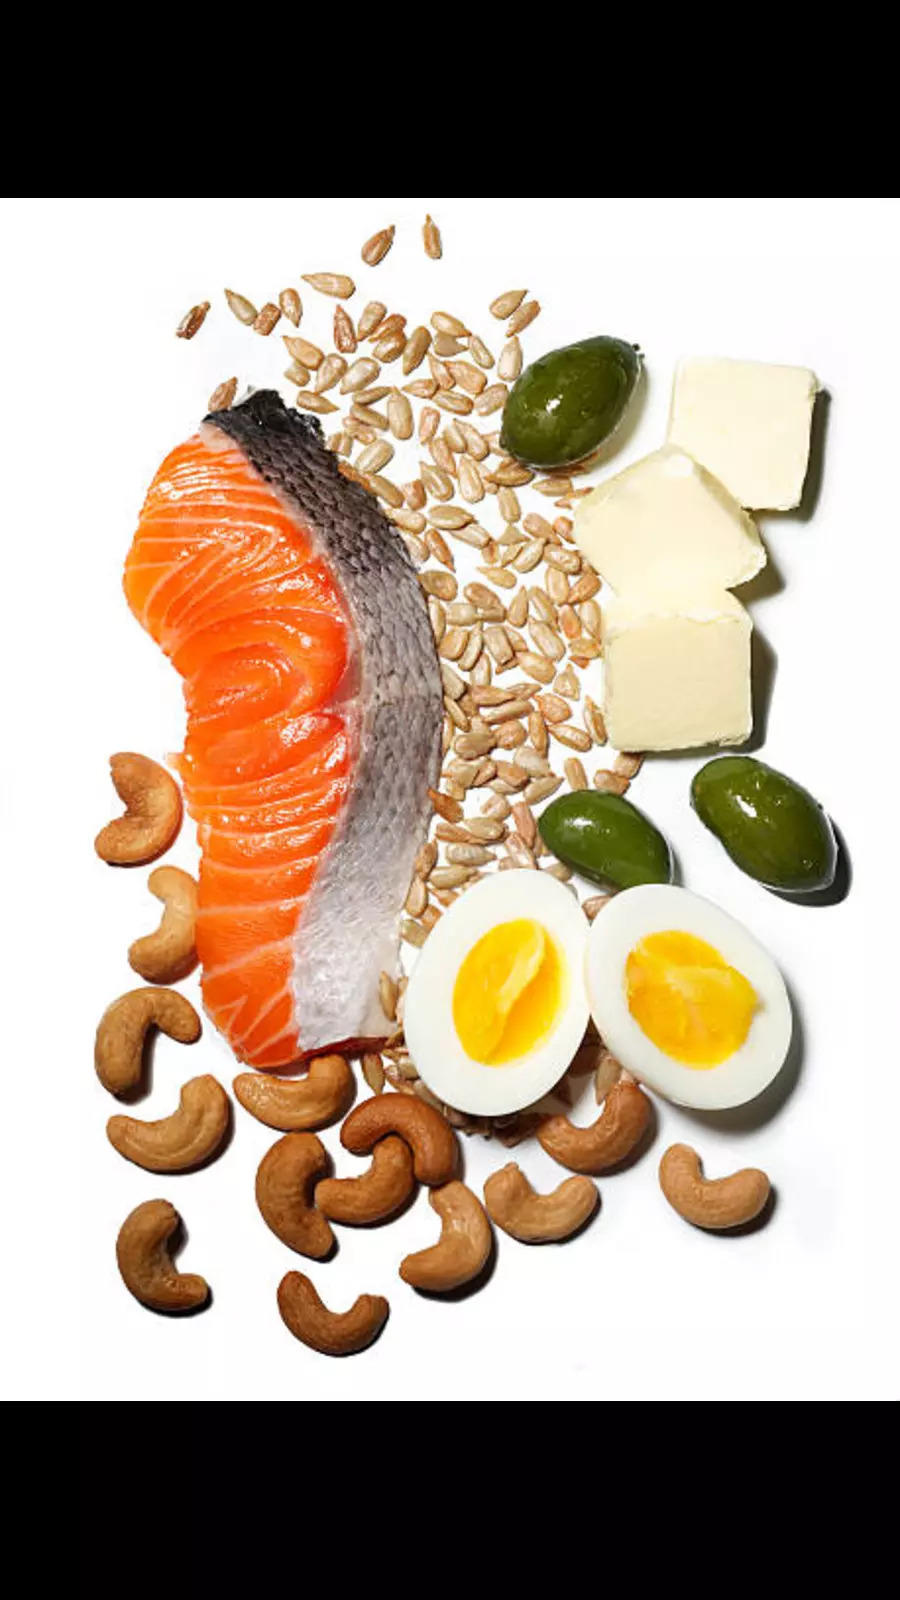 How to improve skin health by eating foods high in zinc